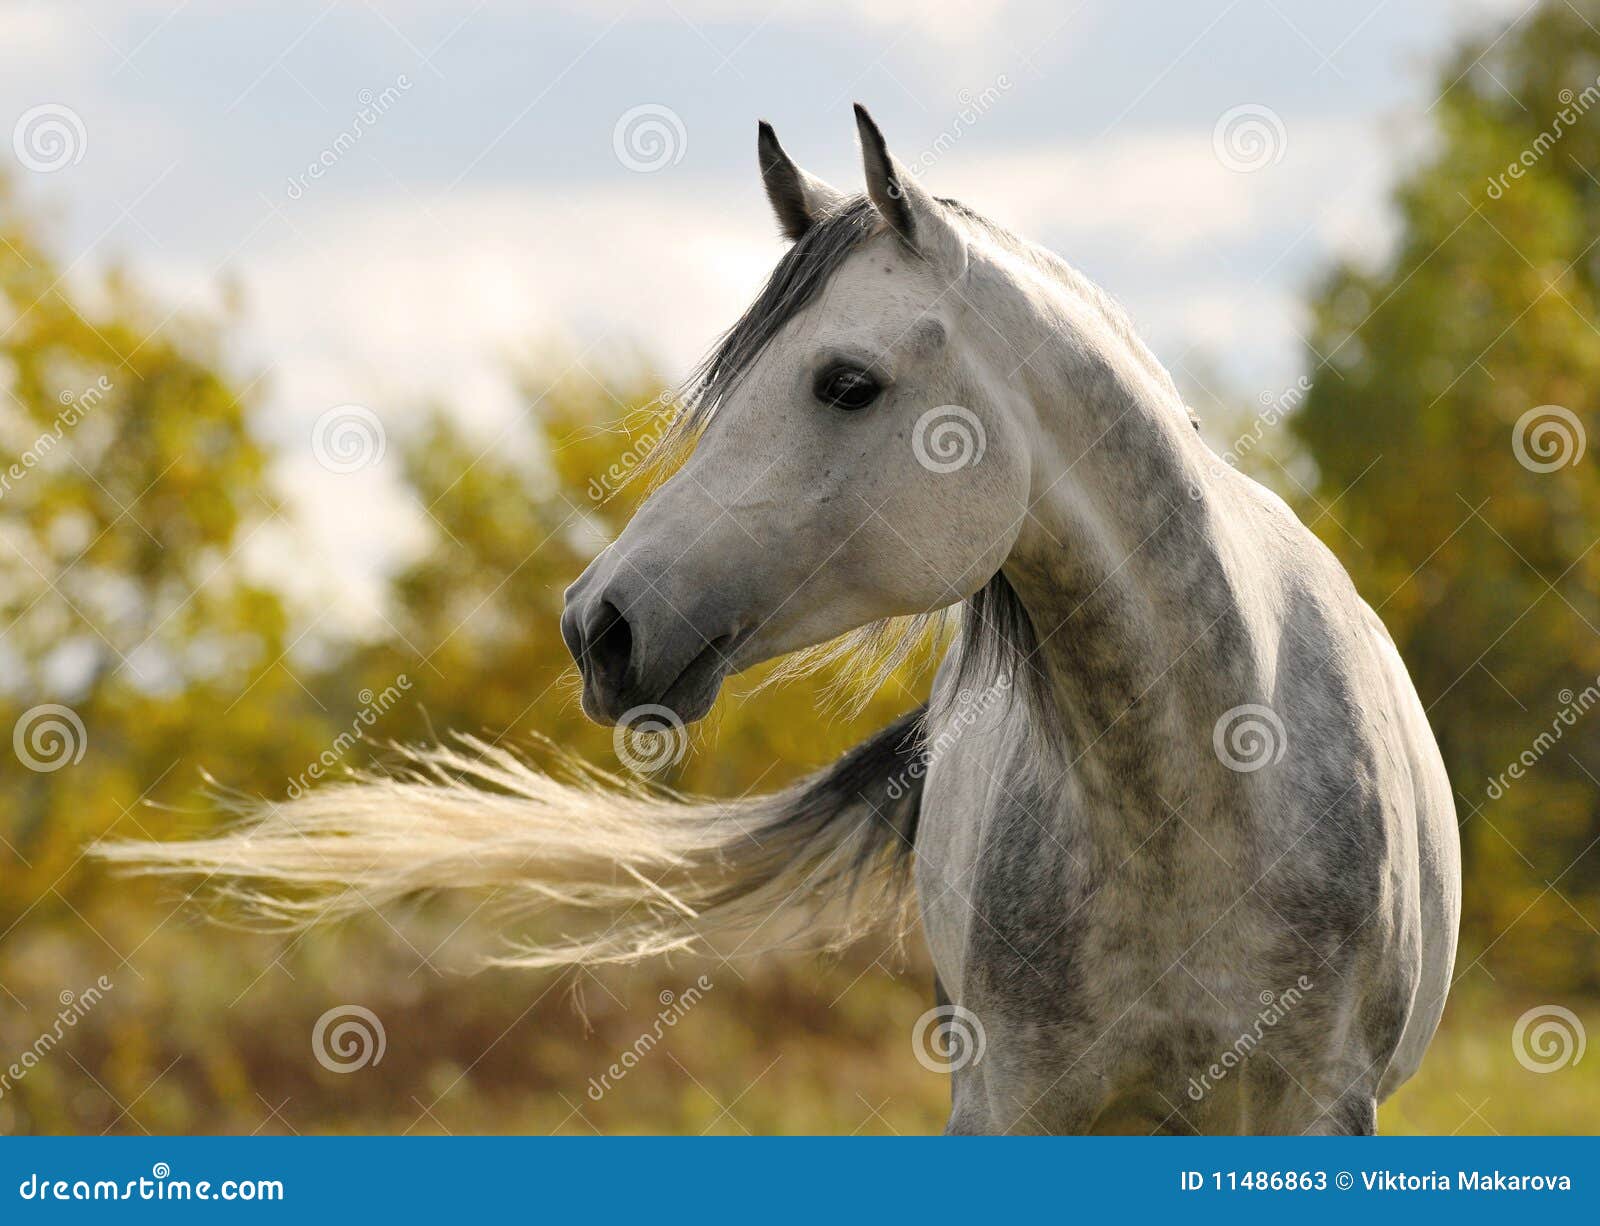 White horse move hair stock image. Image of grass, silver ...